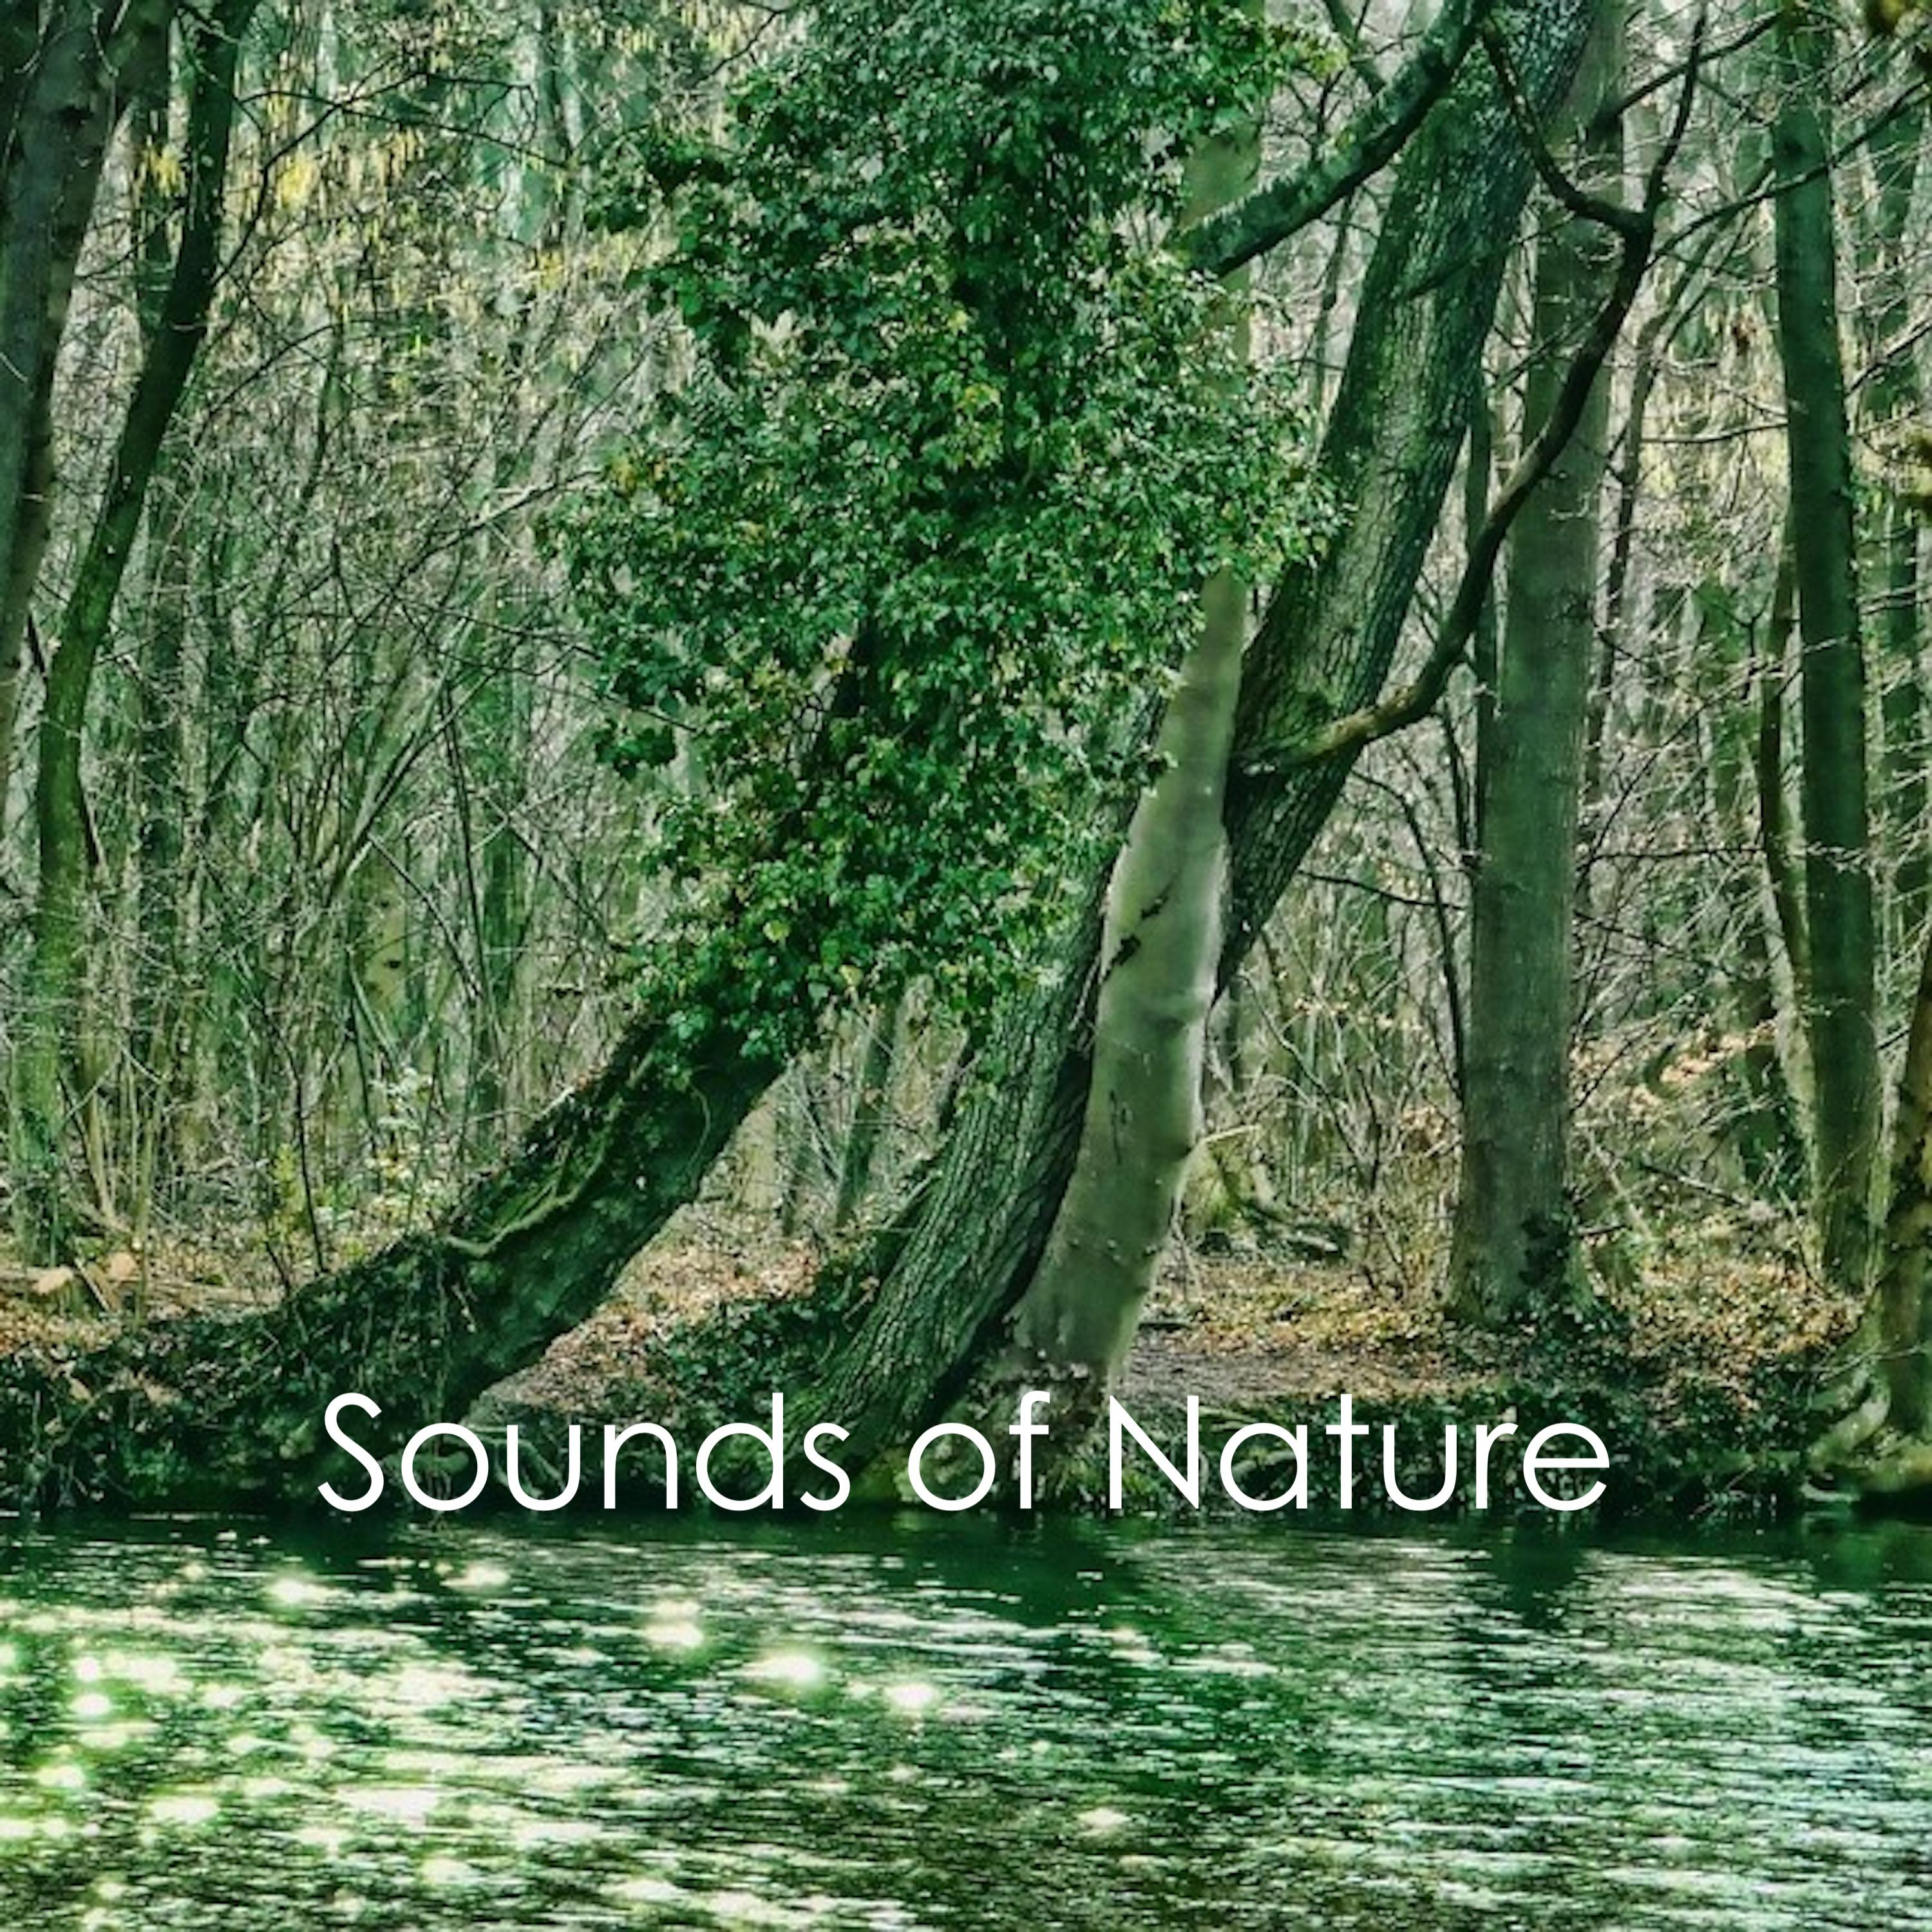 #15 Sounds of Nature: Relaxing Sleep Sounds of Nature, Rainfall for Sleep, Loopable Rain, White Noise, Insomnia Sleep Aid